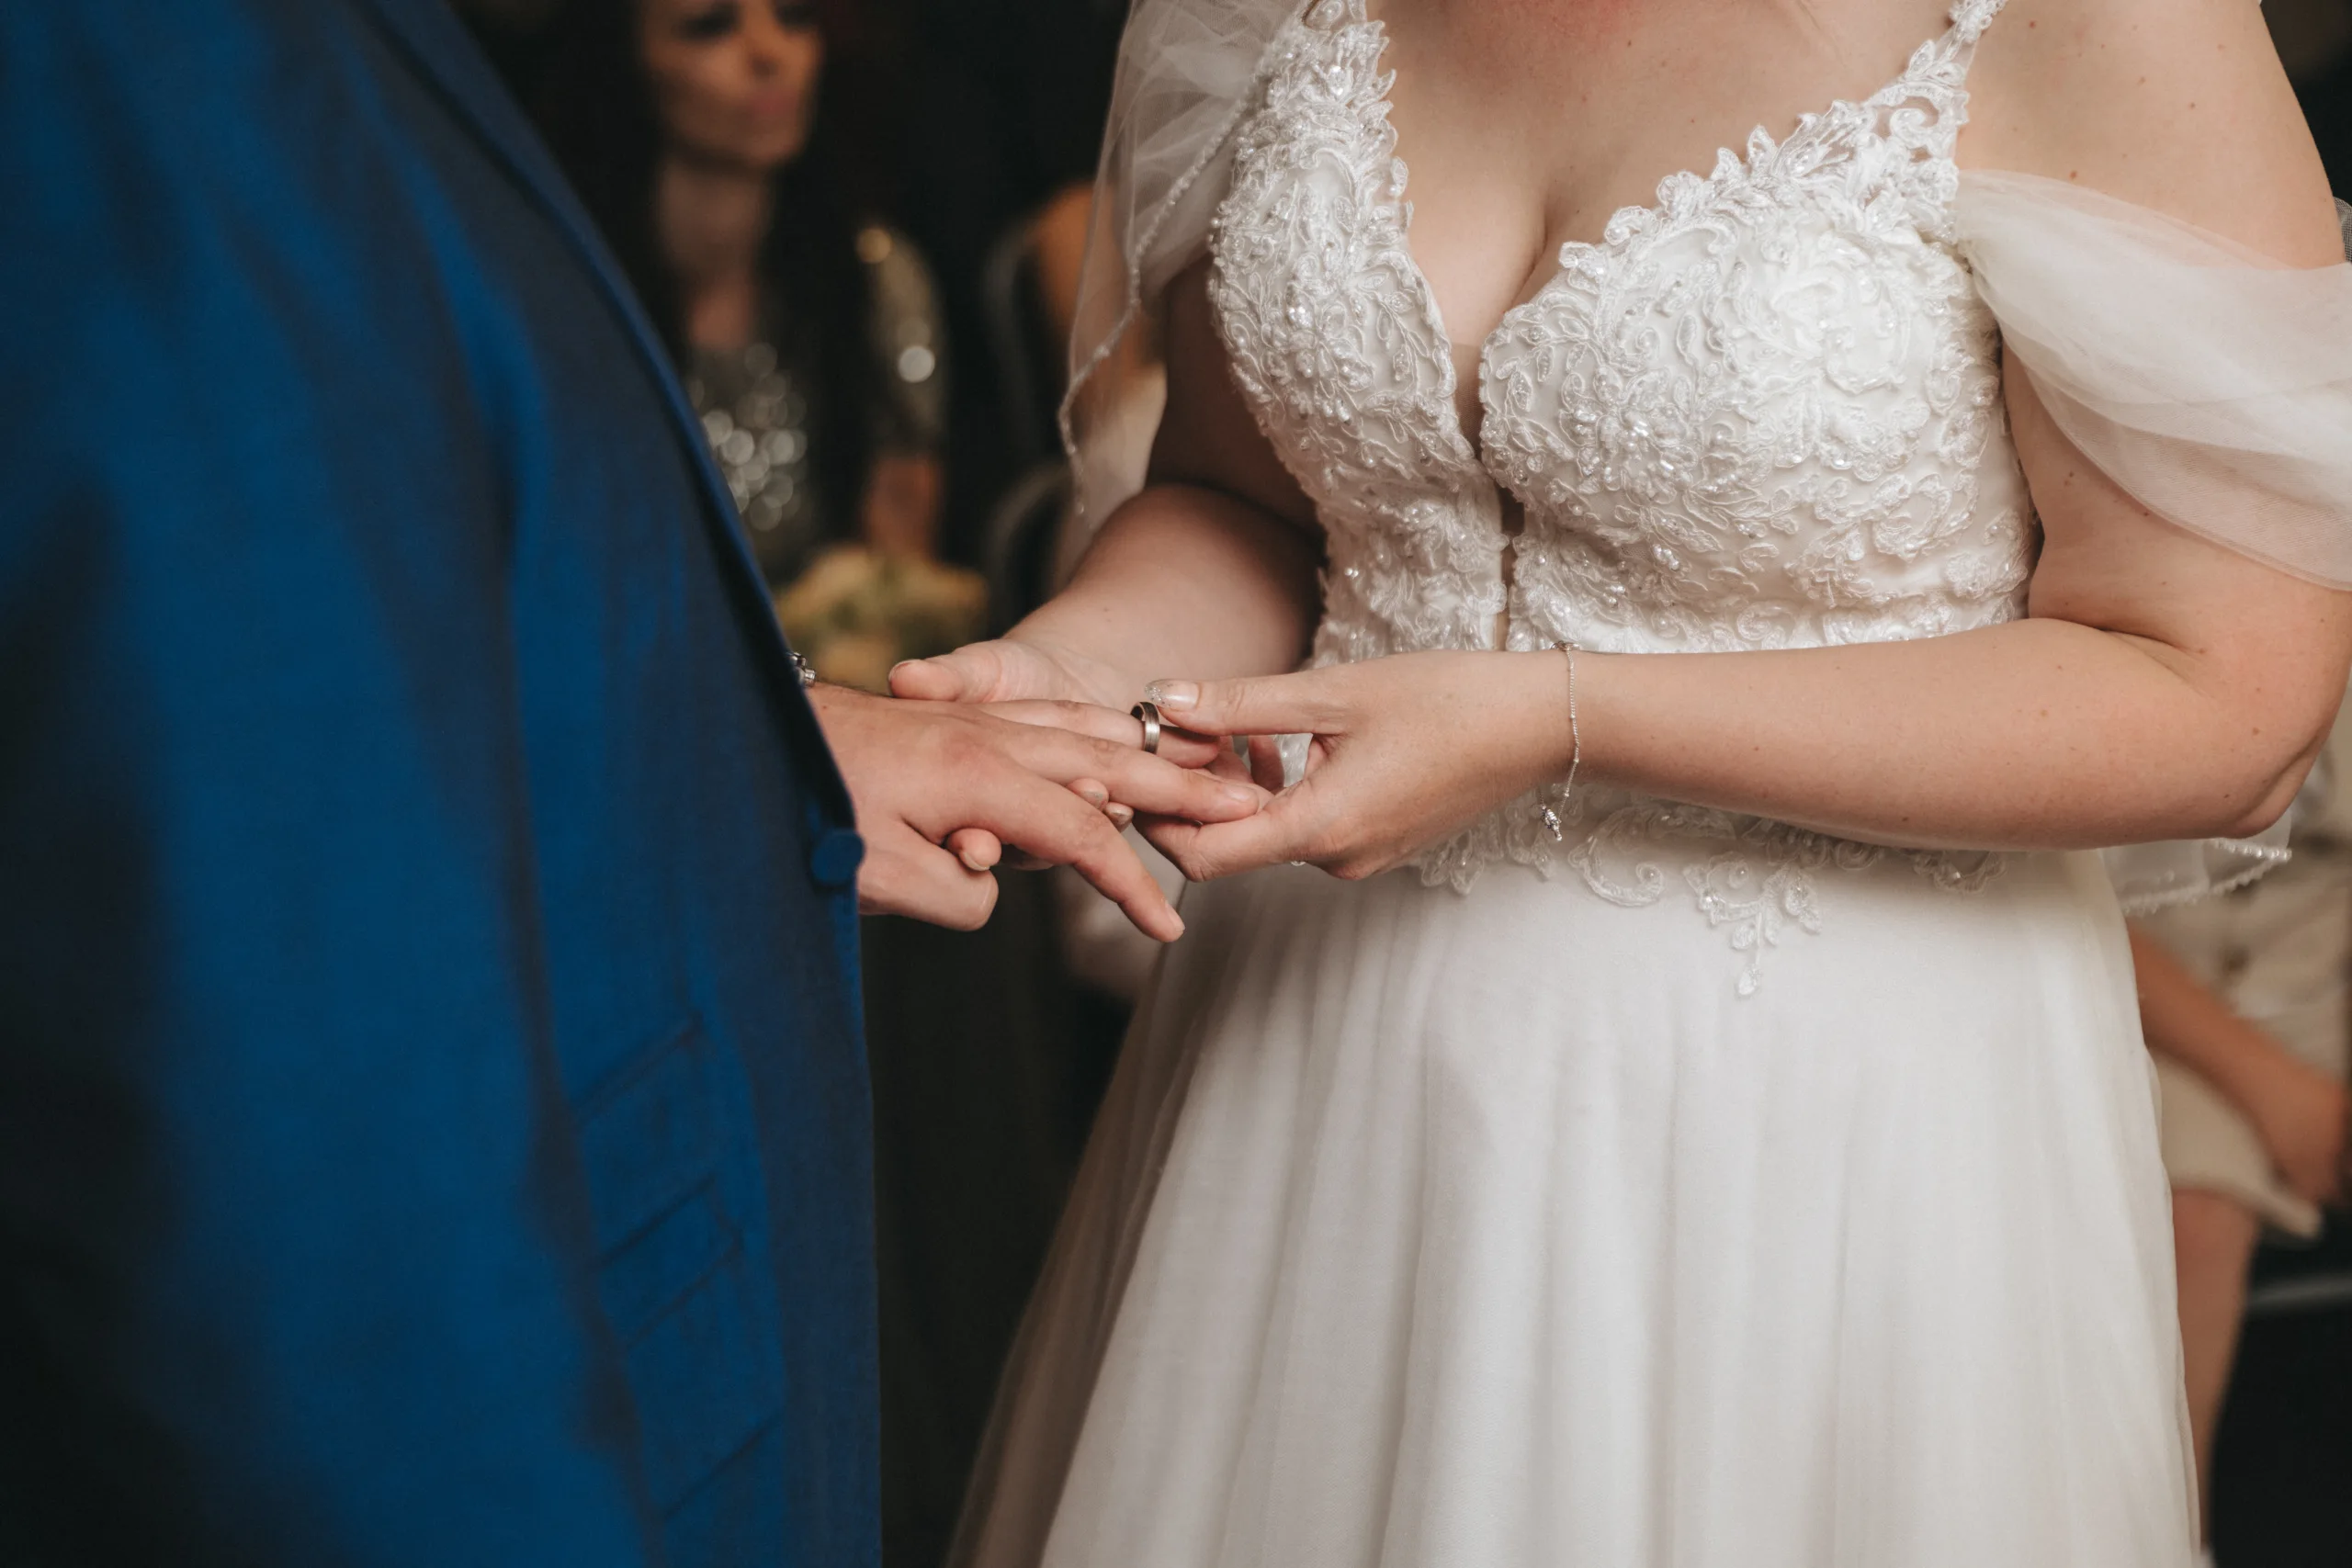 A bride and groom exchange rings during their Yorkshire wedding ceremony.